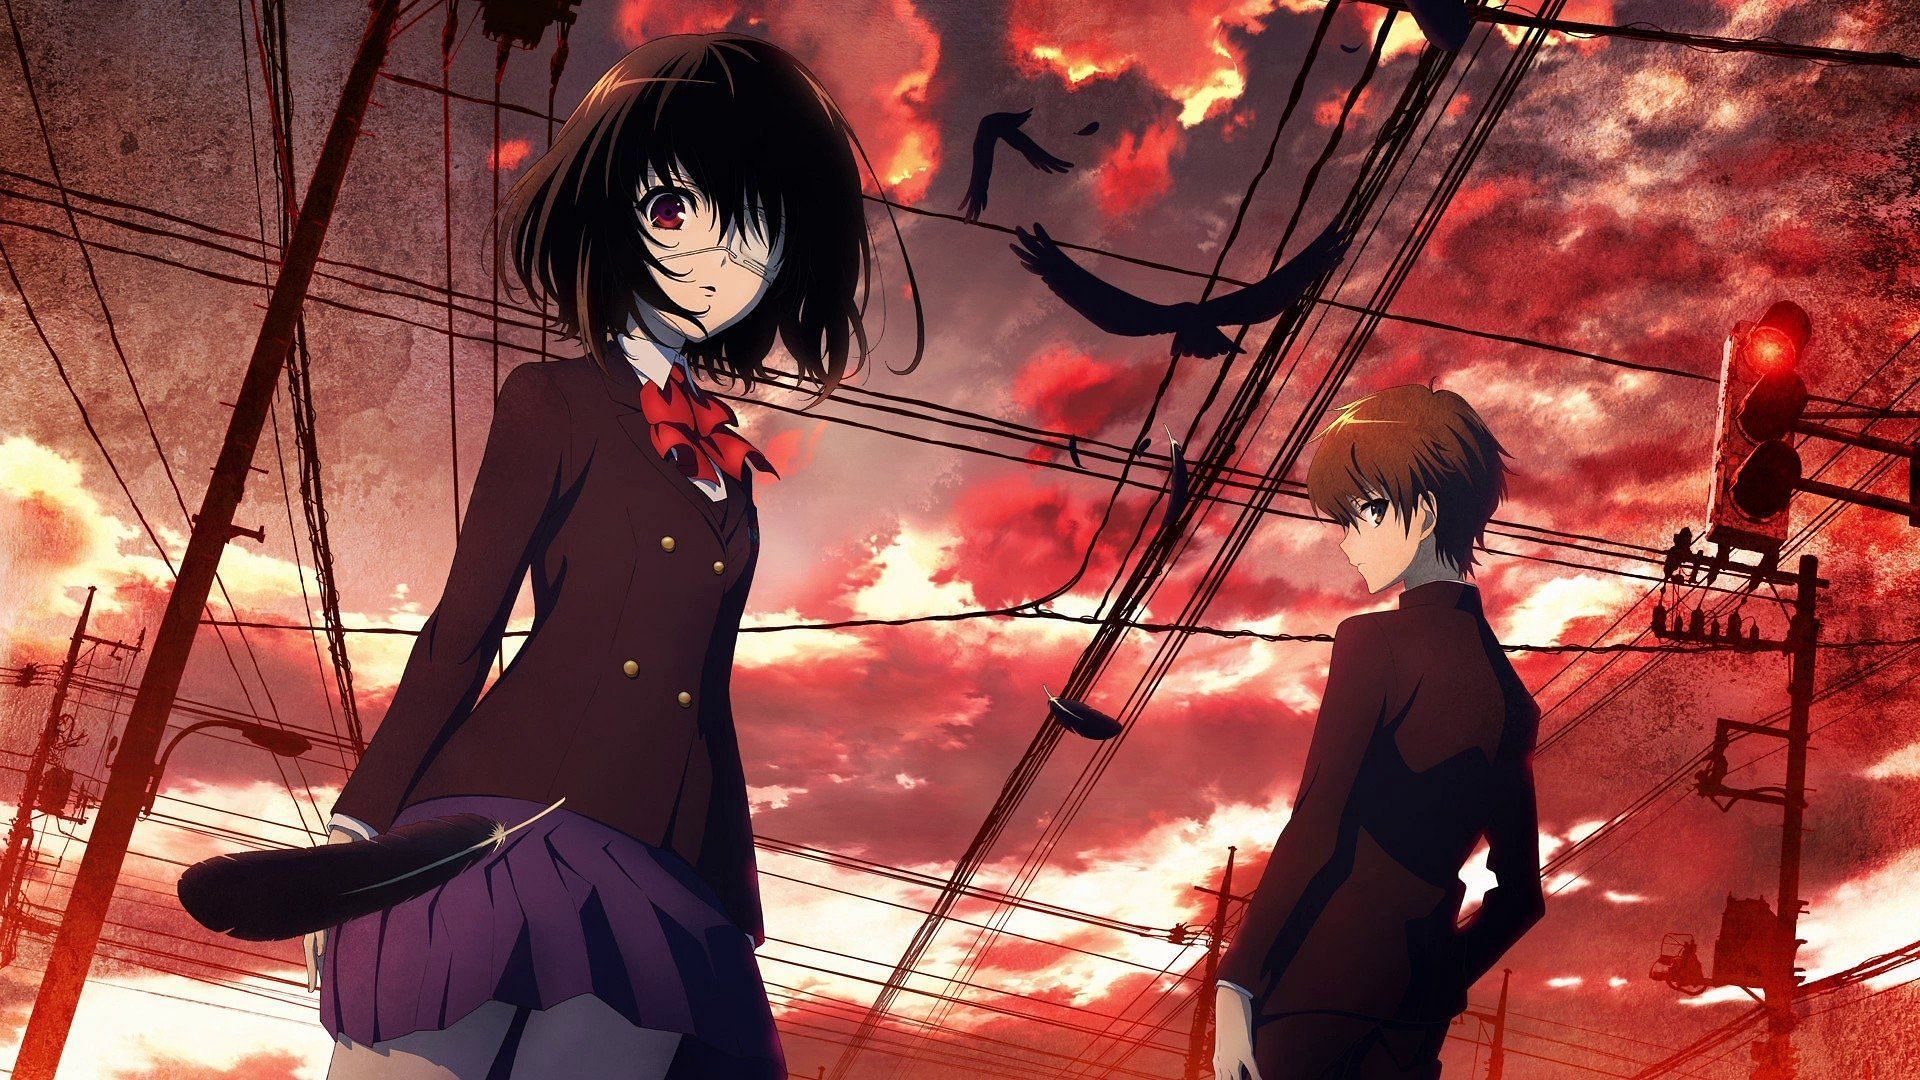 10 Thriller and Horror Anime Series and Movies Online